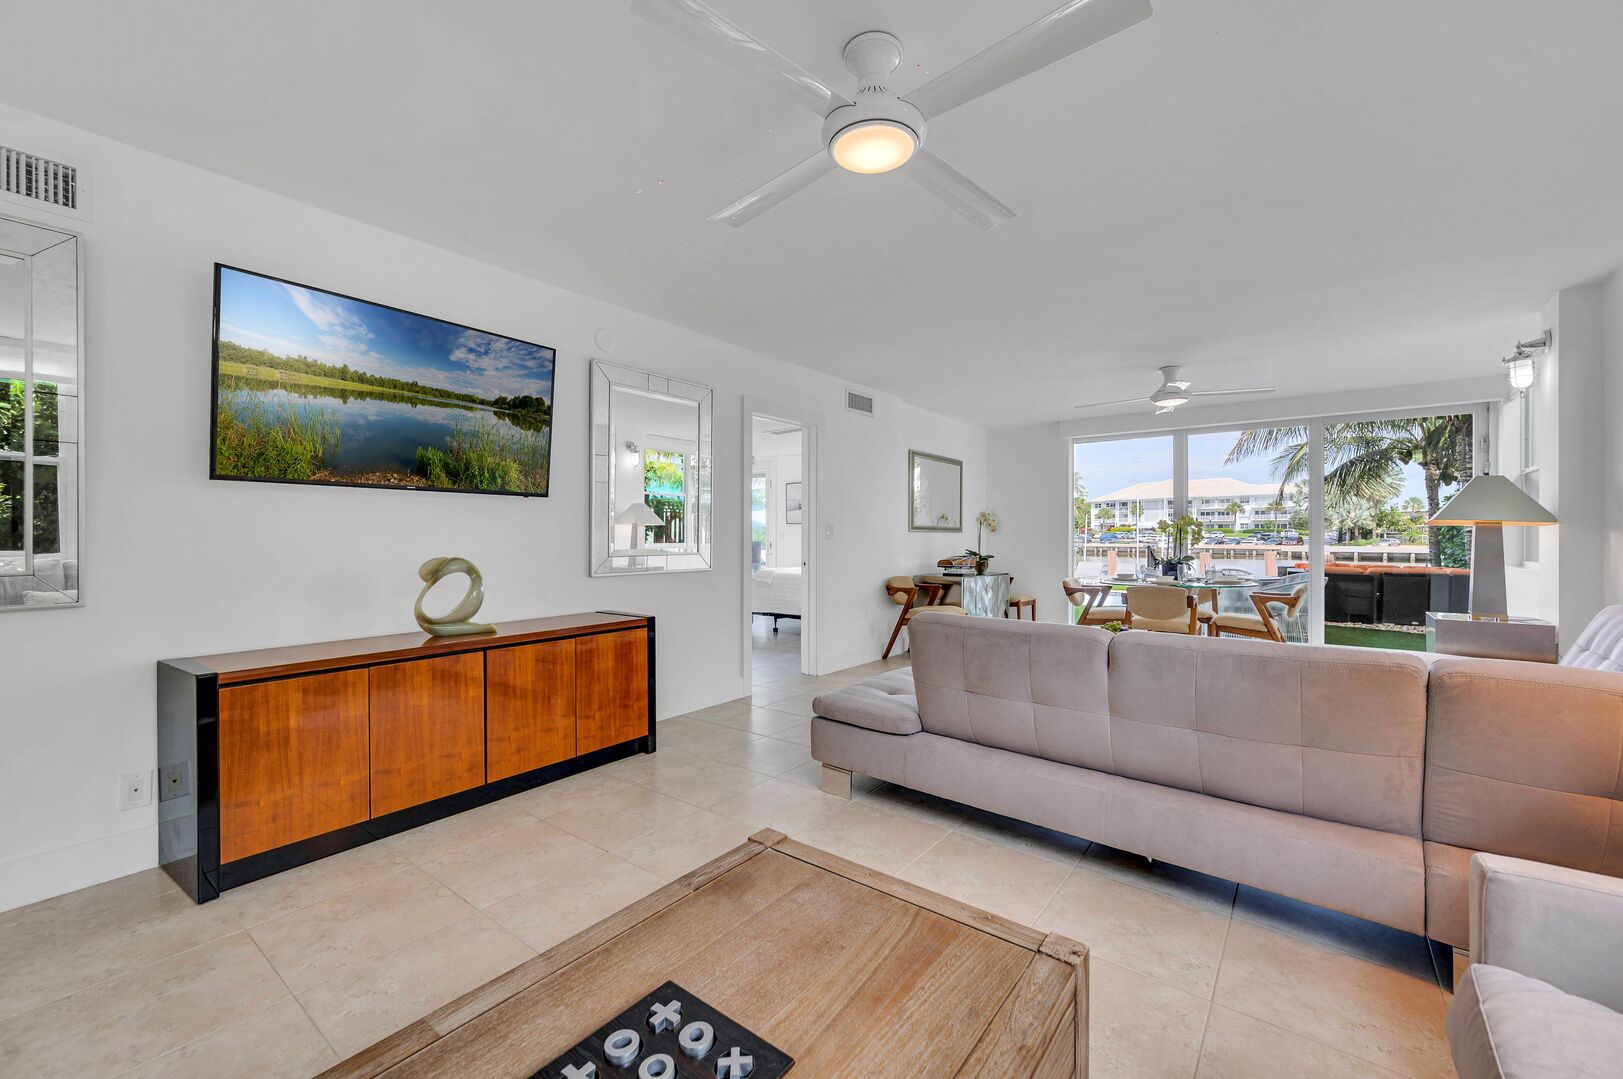 Welcome to Lago Key Suite Two! This Suite features 3 bedrooms and 2 full bathrooms.